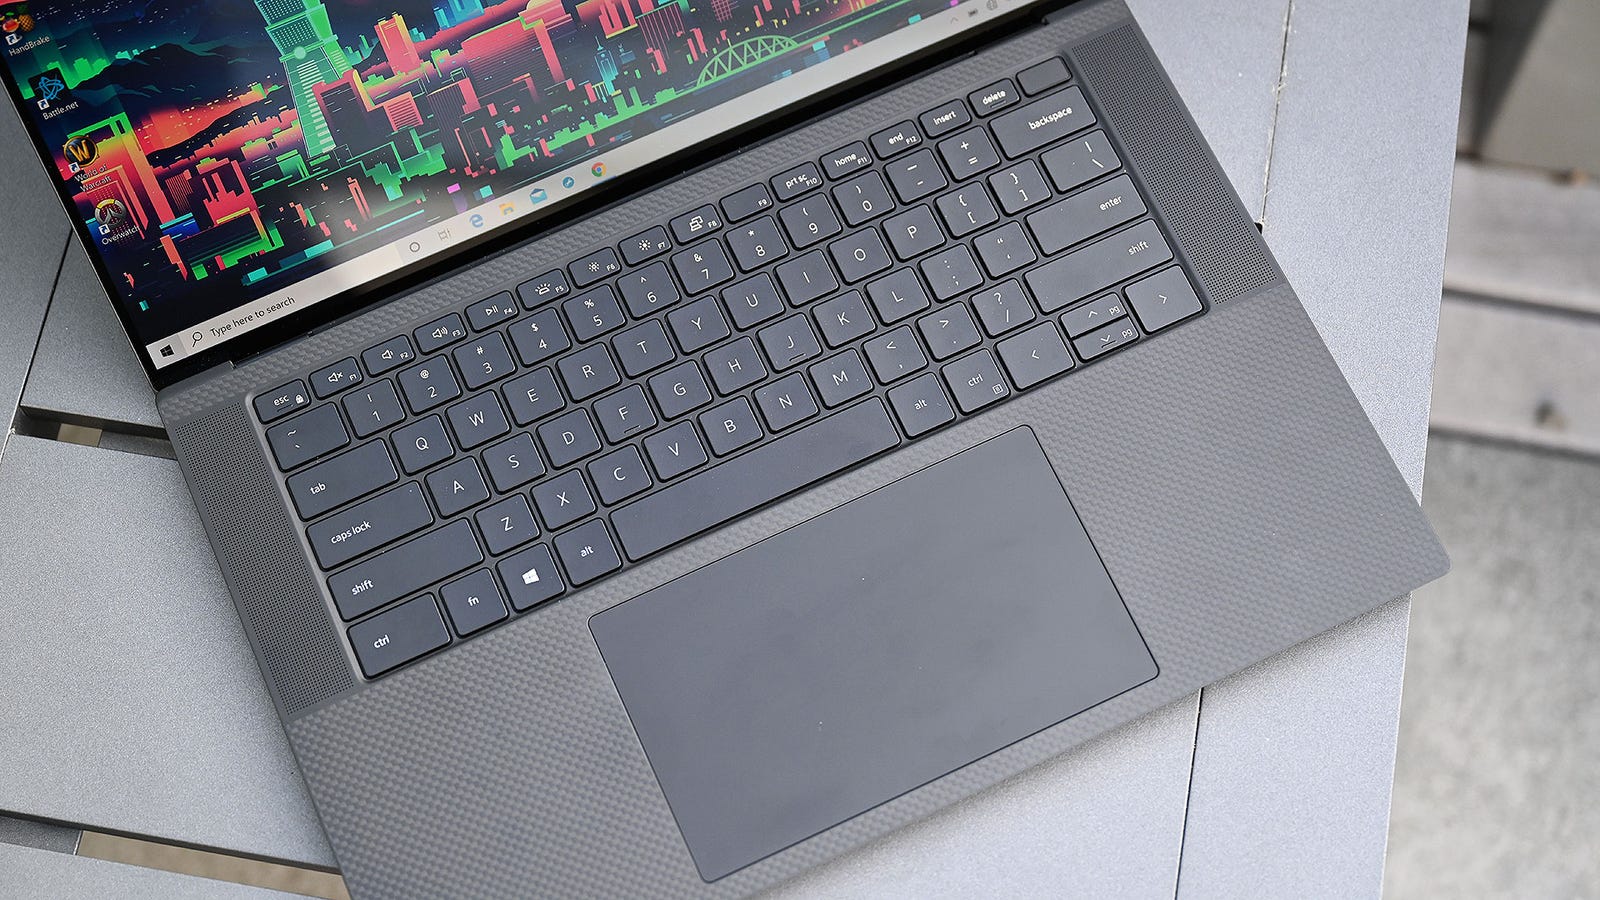 Illustration for article titled The Dell XPS 15 Might Be the Best All-Around Laptop You Can Buy